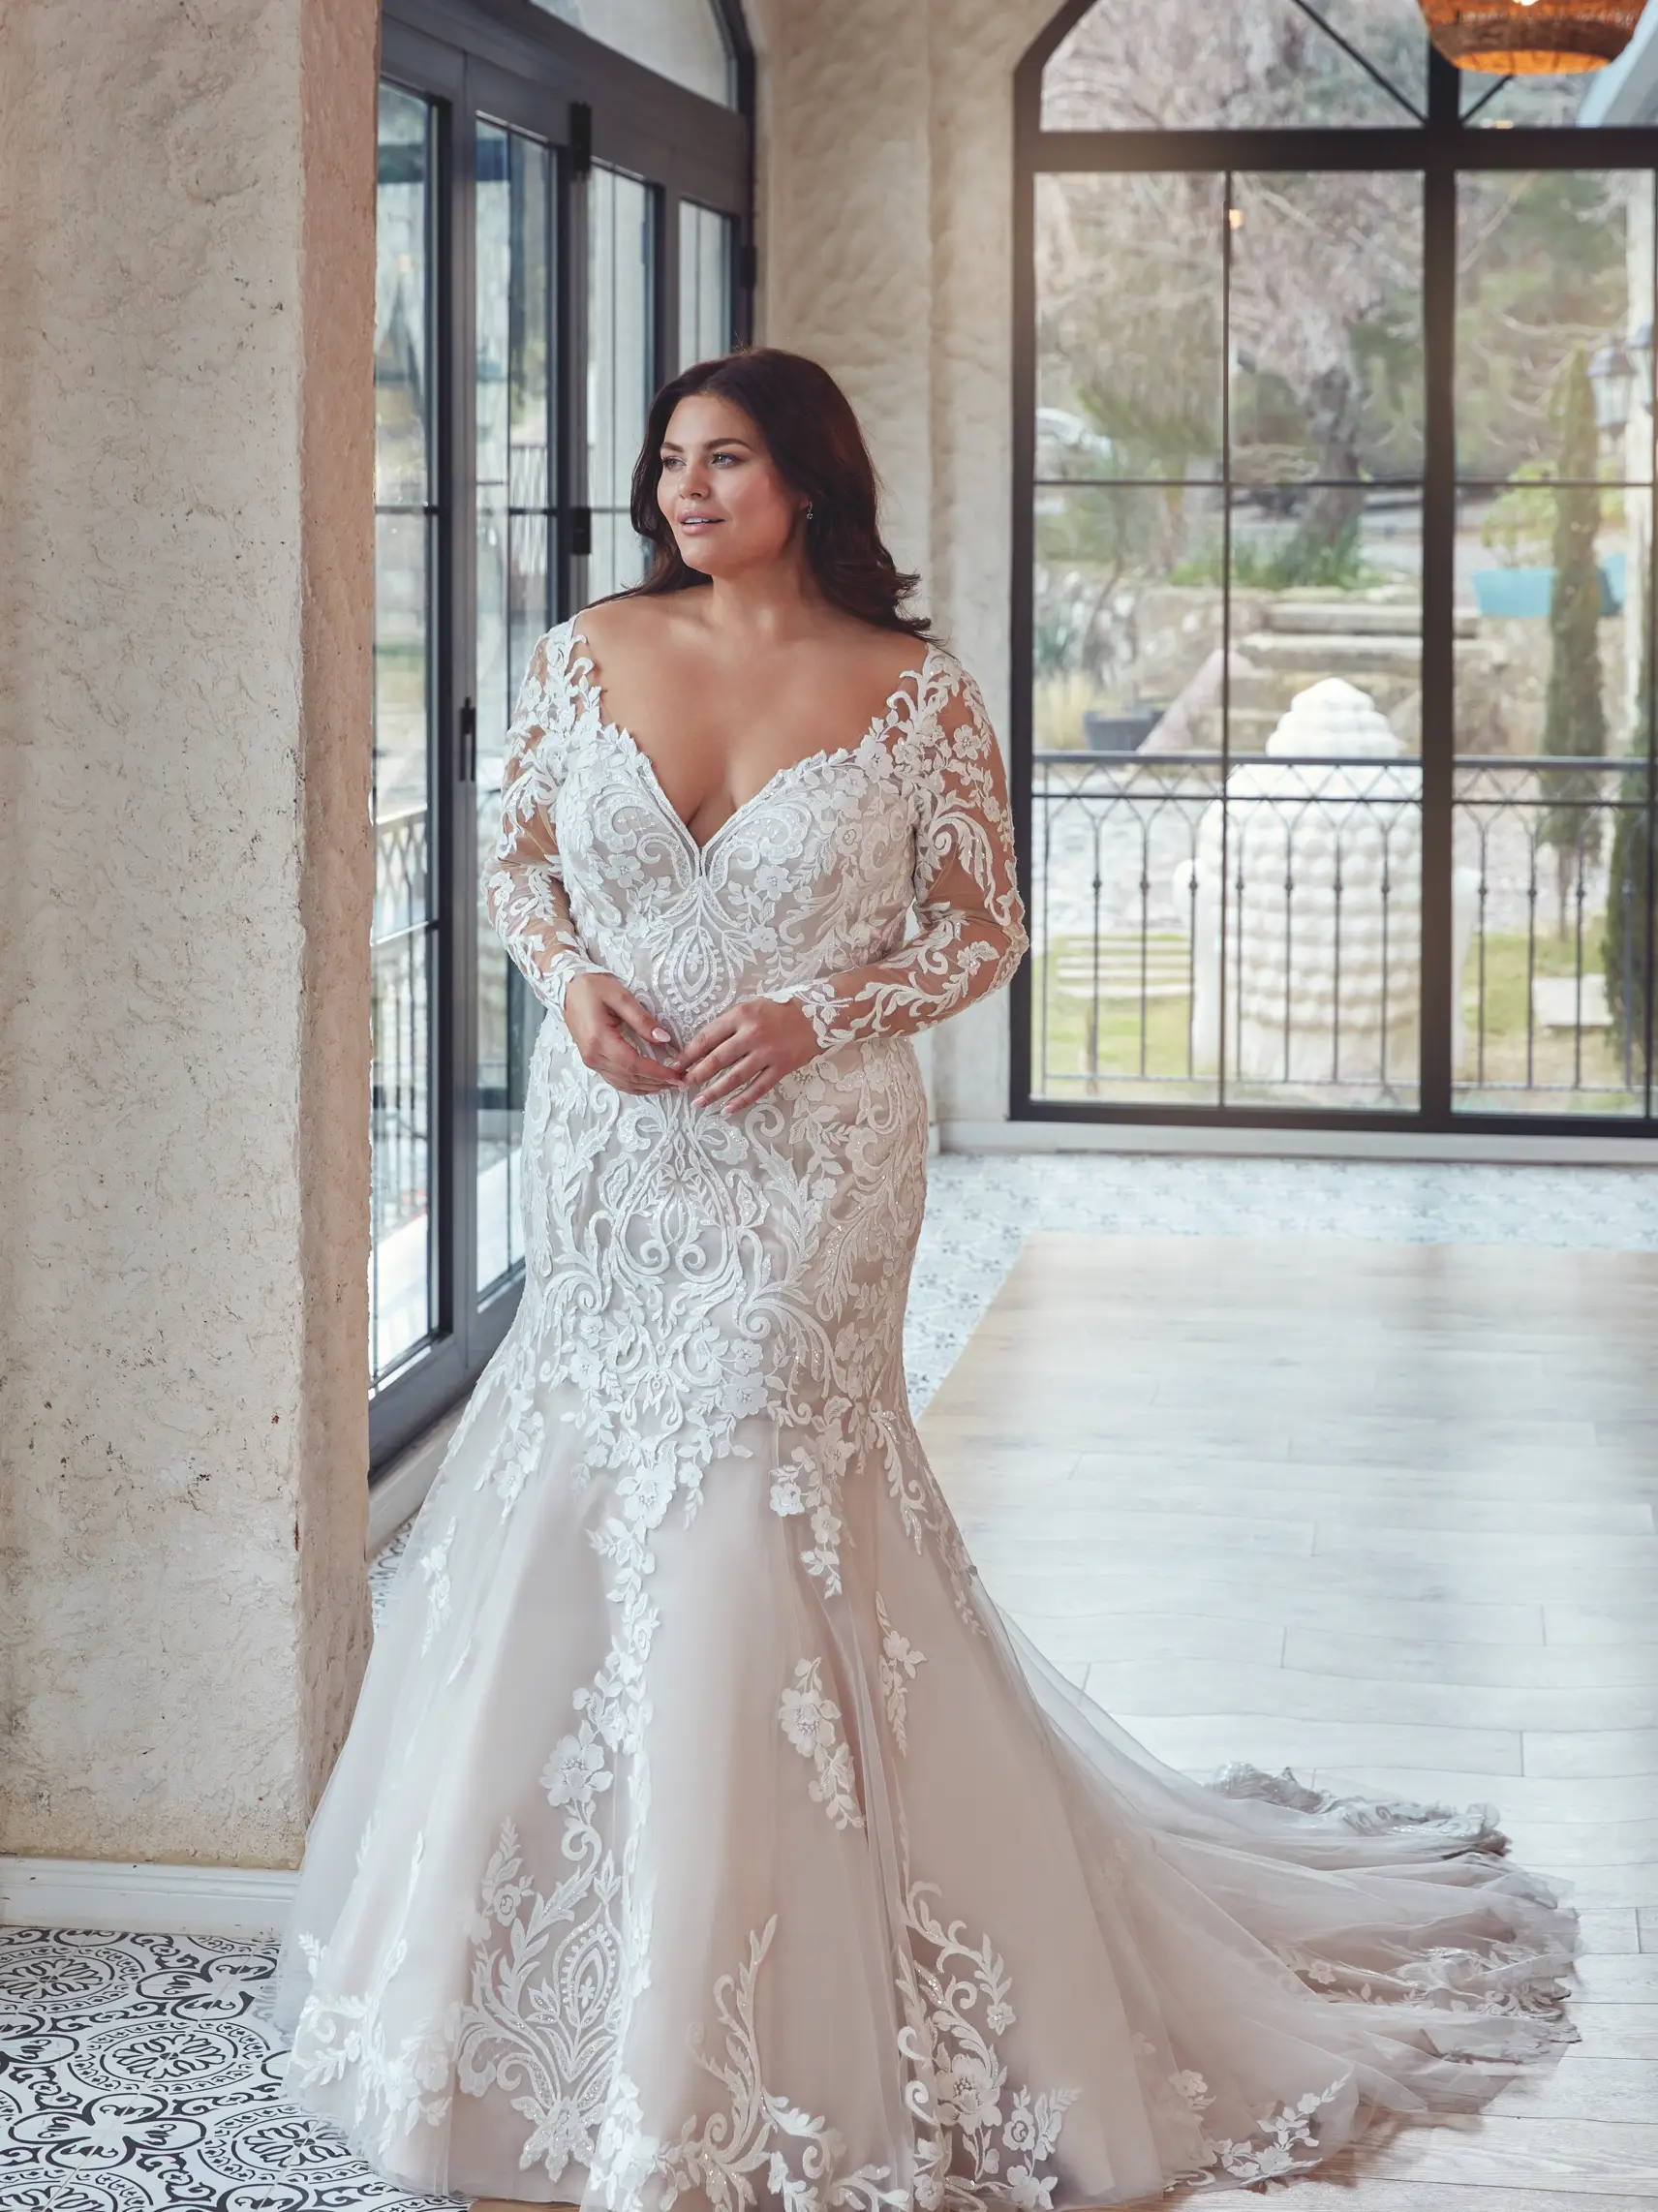 Calling all midsize/plus size/curvy brides, you're so worthy and